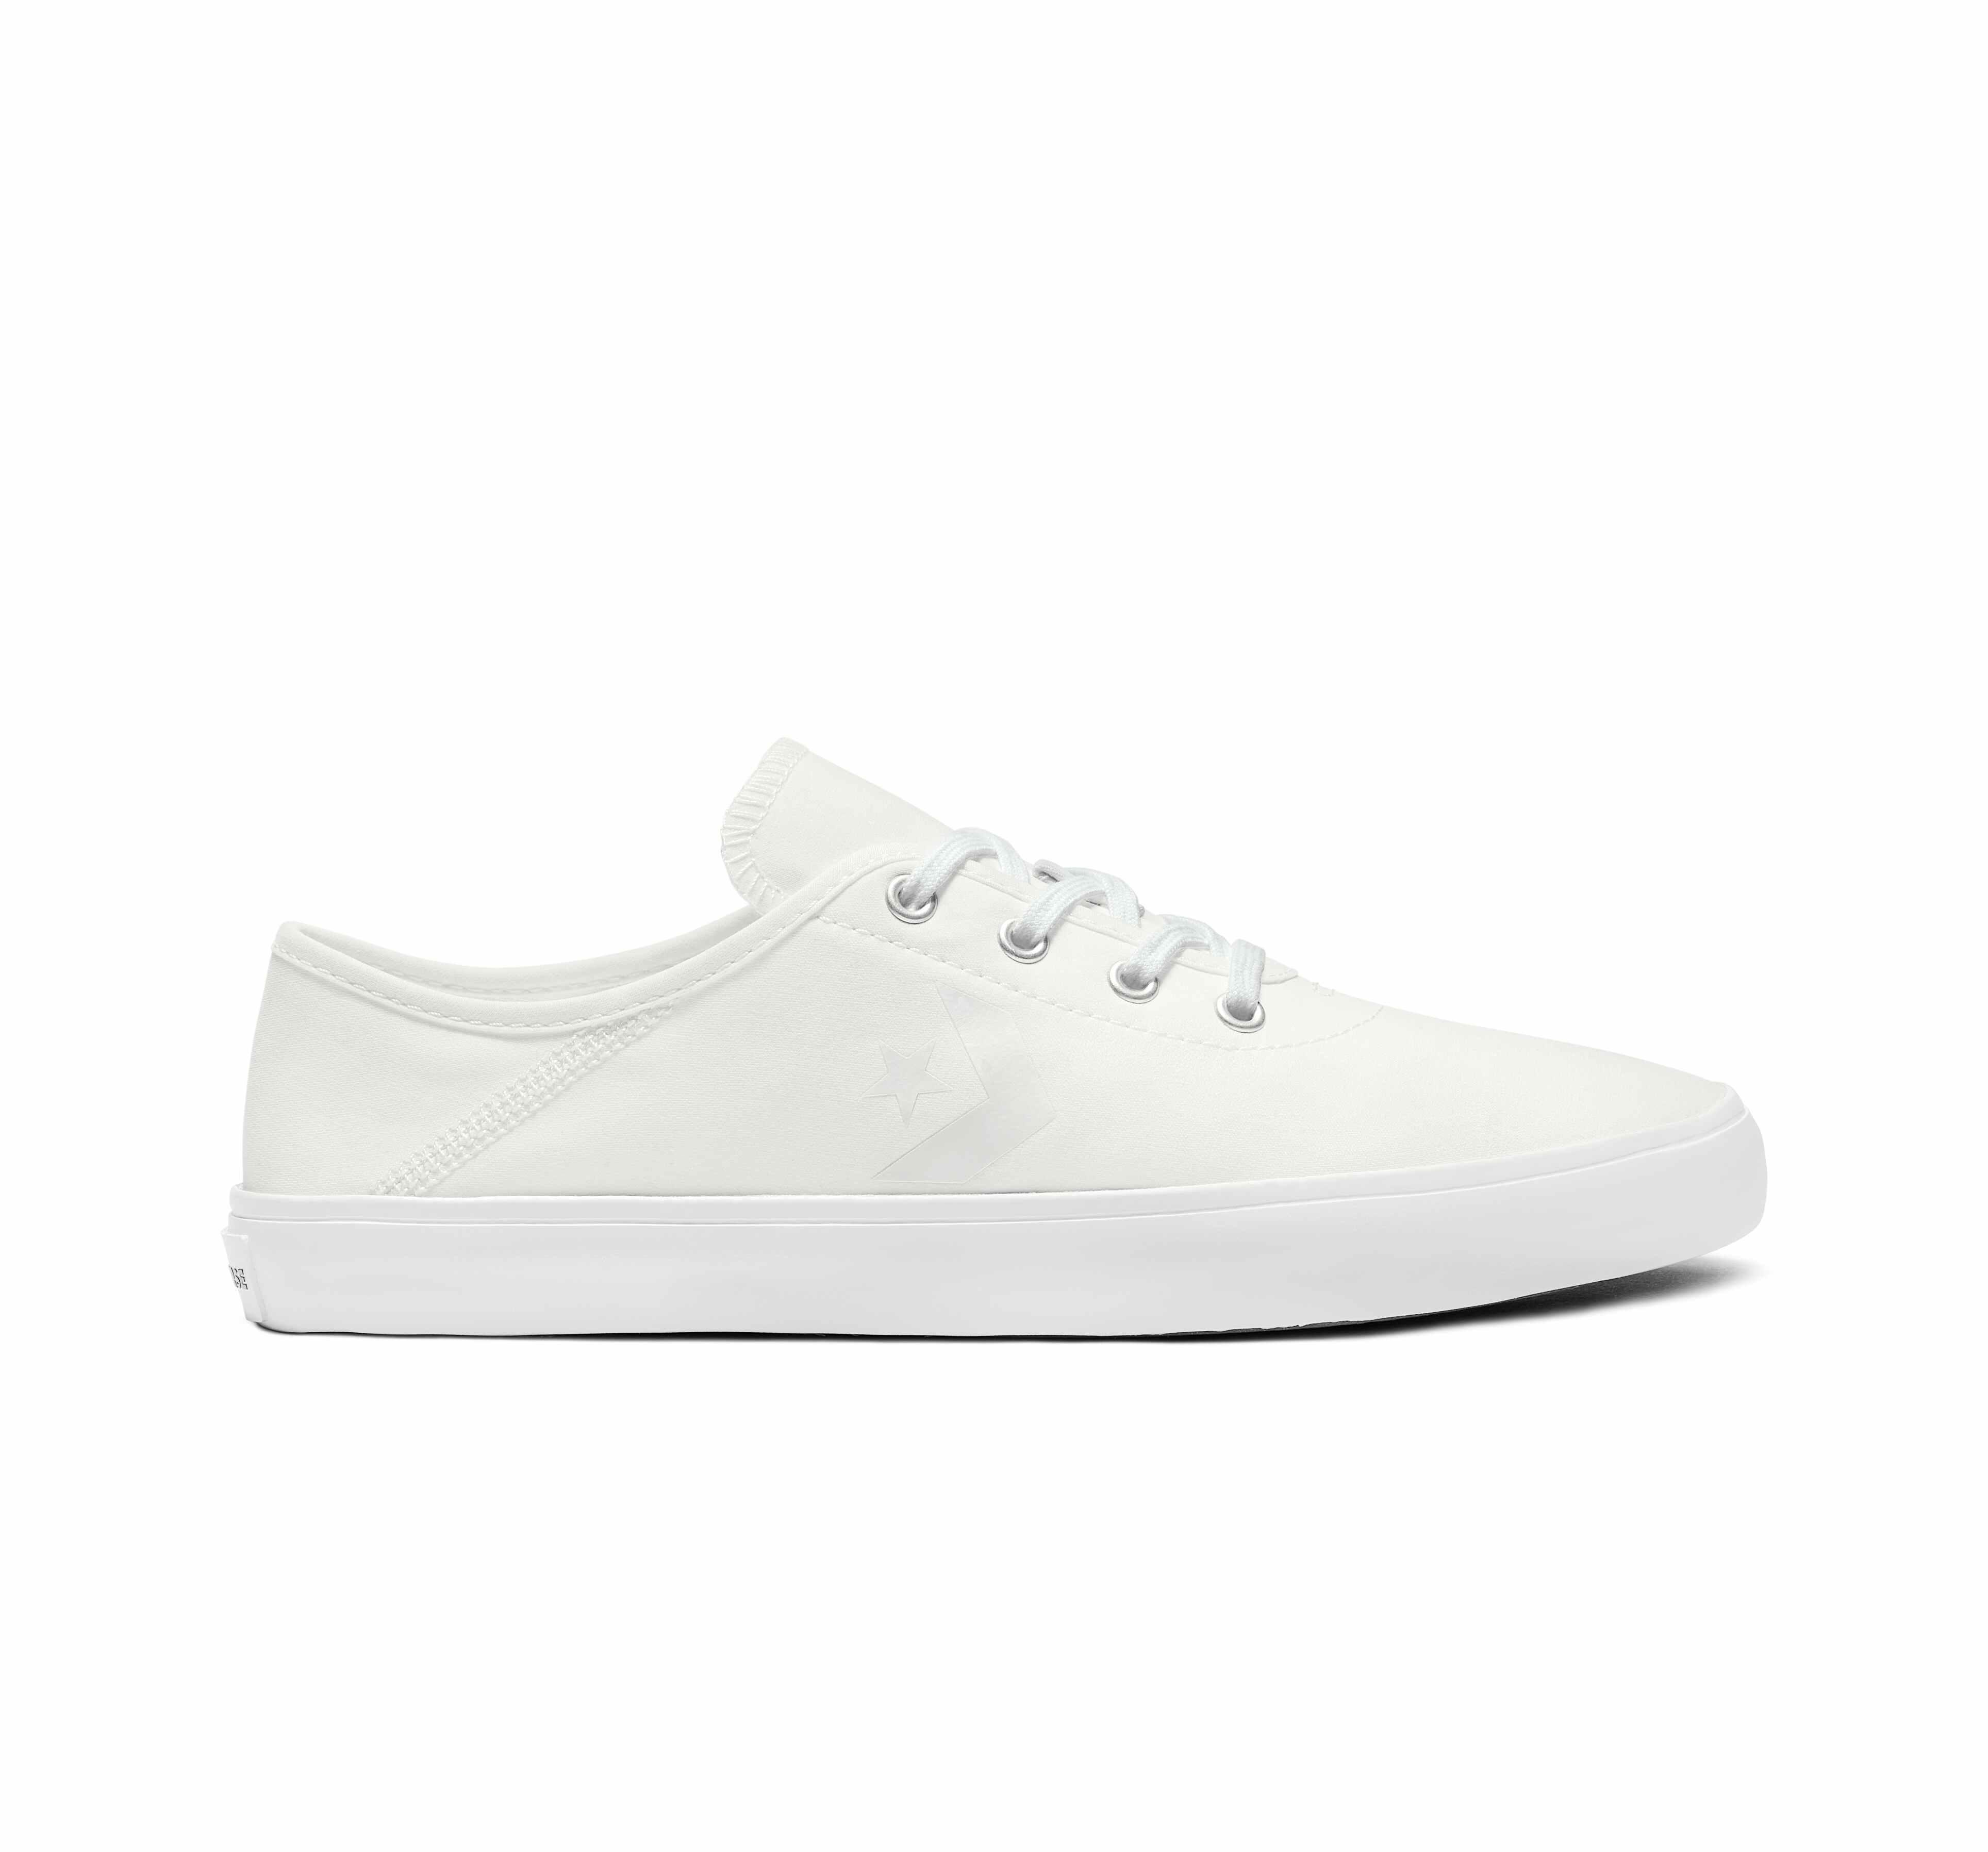 Converse Costa Collapsible Heel Low Top in White - Lyst